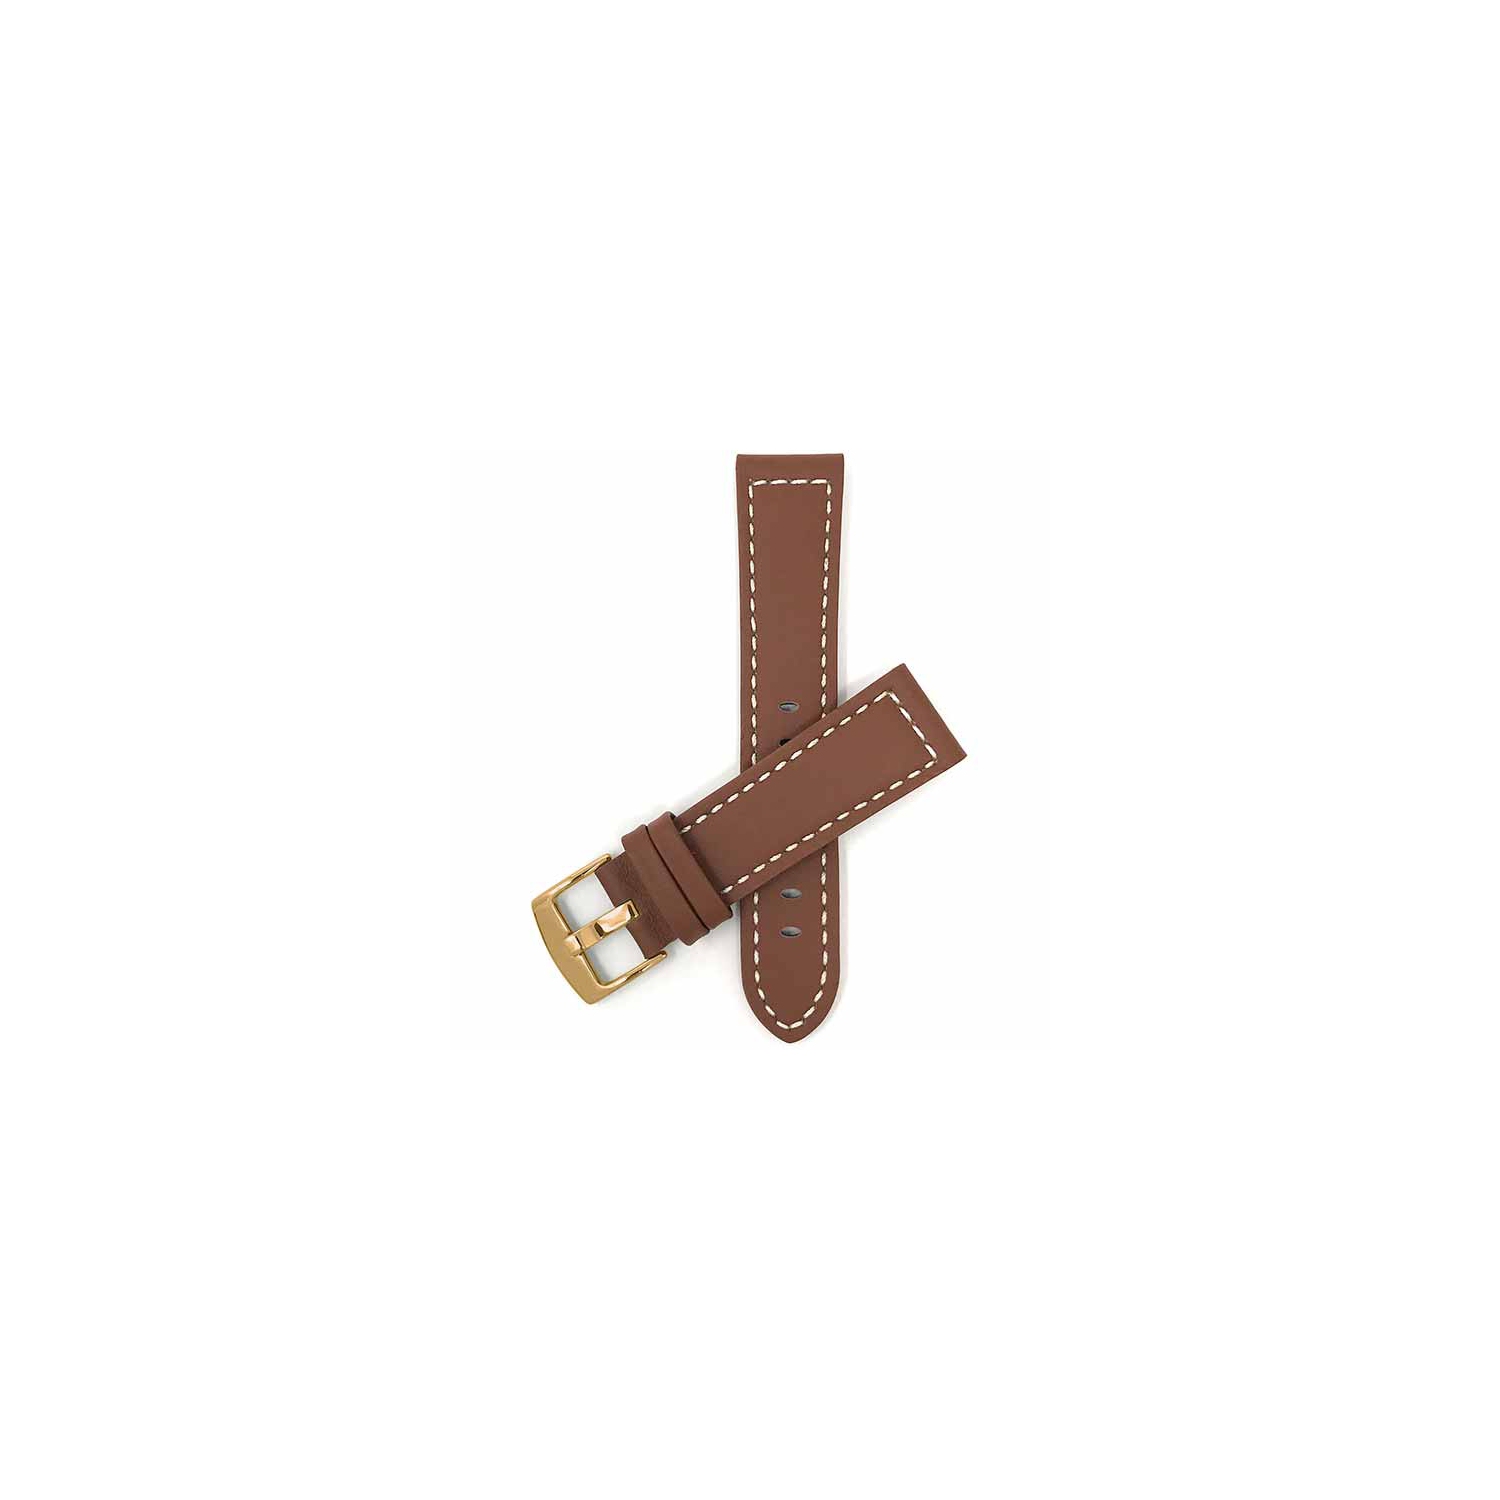 Bandini Thick Leather Racer Smartwatch Strap, White Stitch For Michael Kors MKGO - 20mm, Tan / Gold Buckle